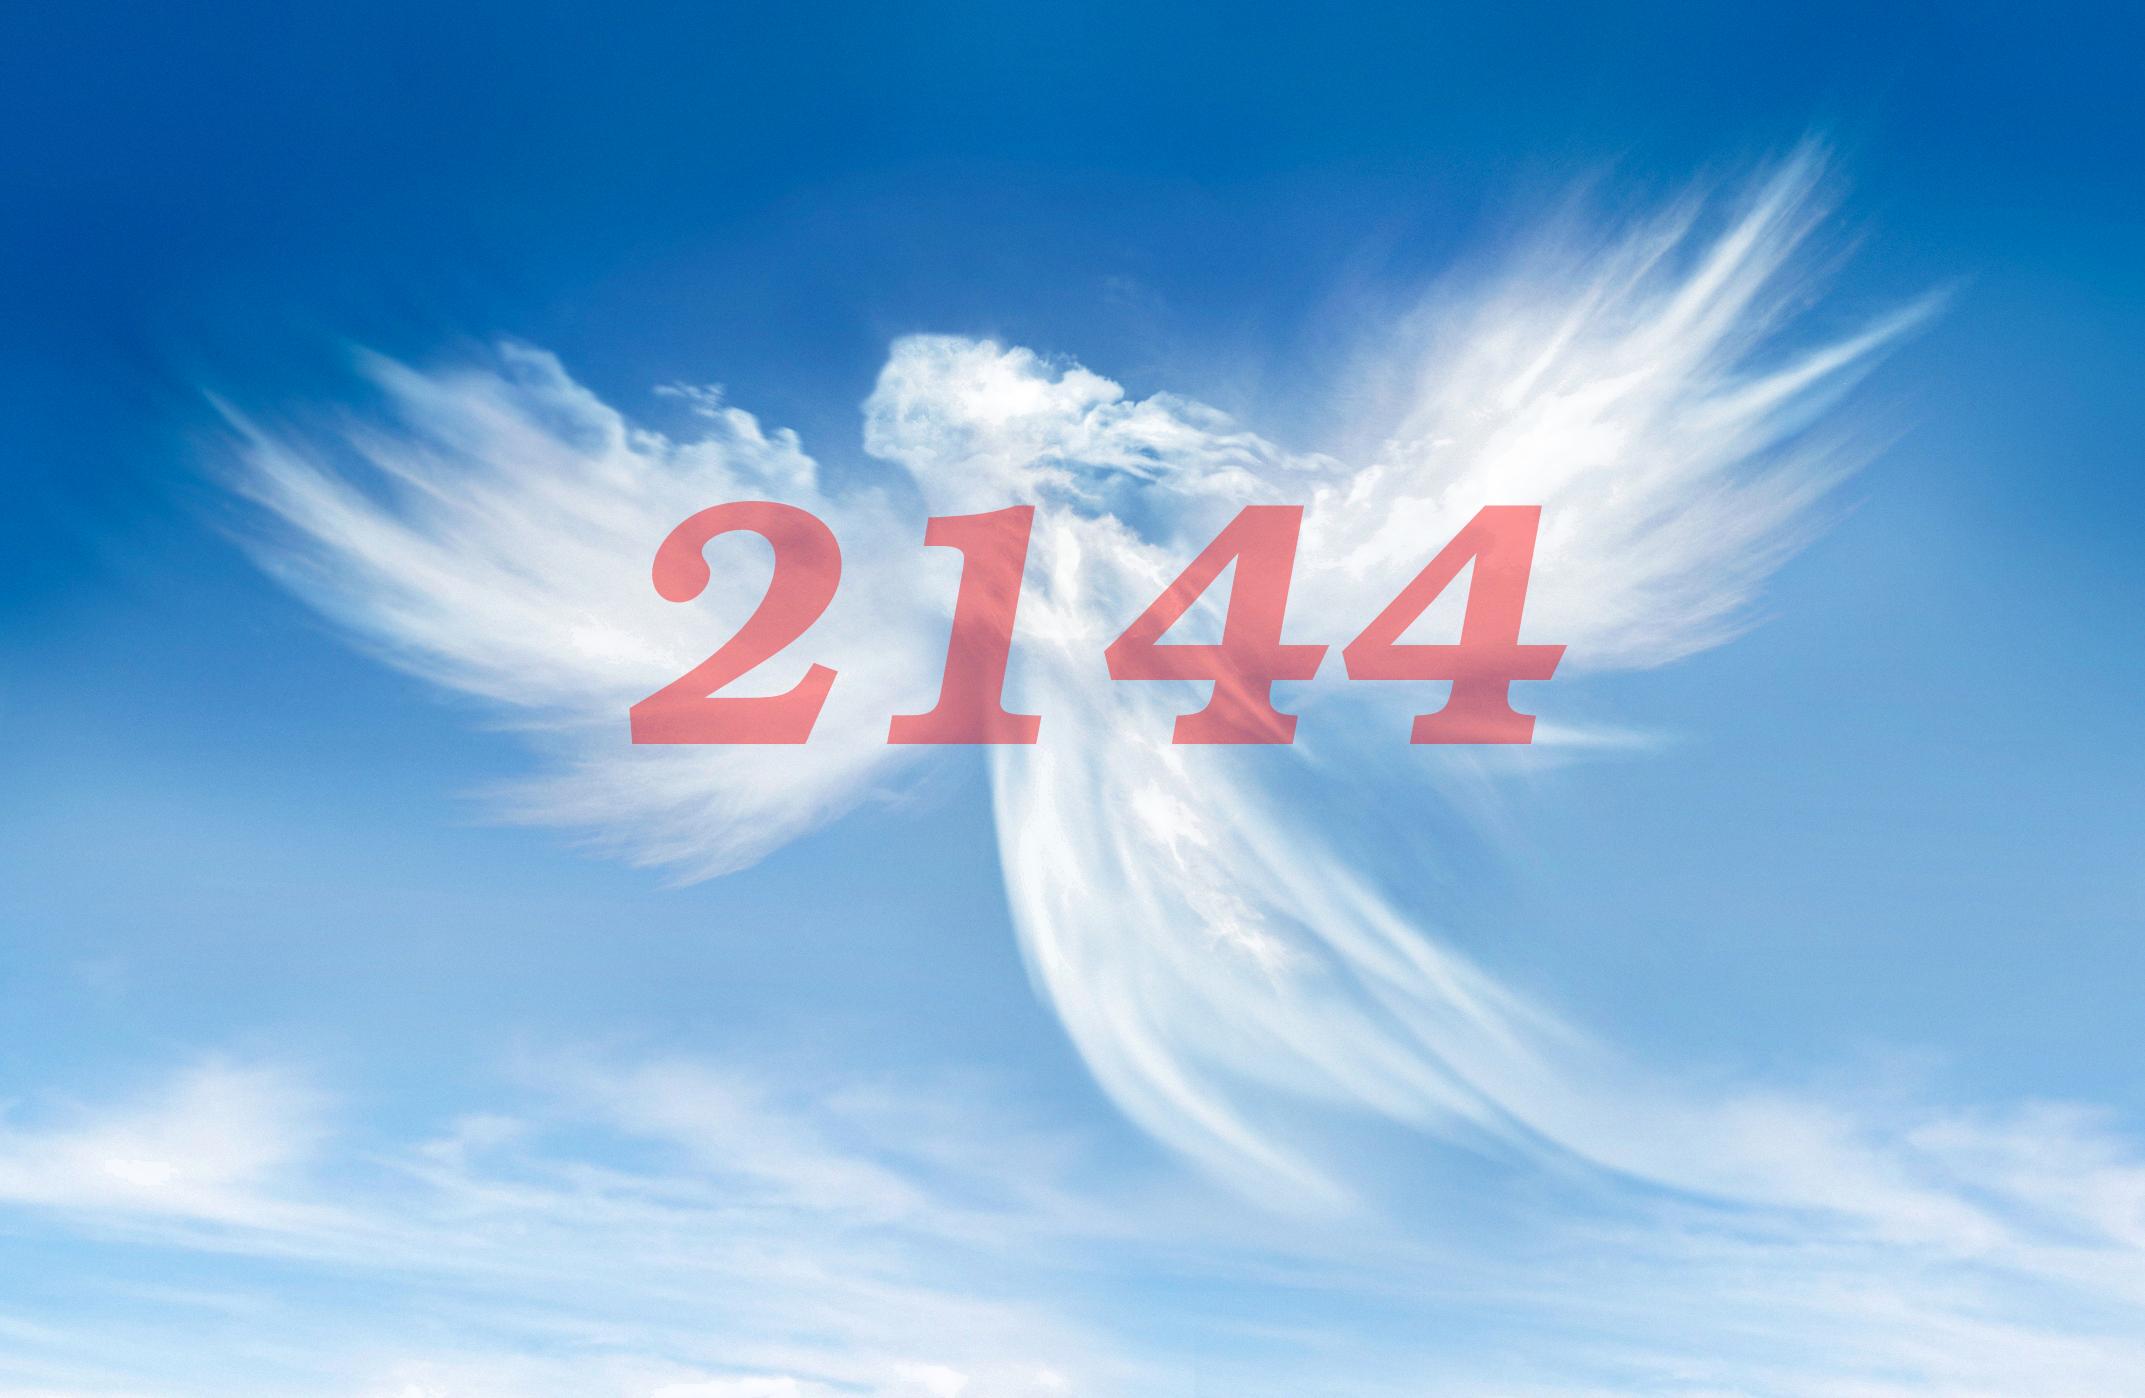 Angel Number 2144 Numerology Meaning